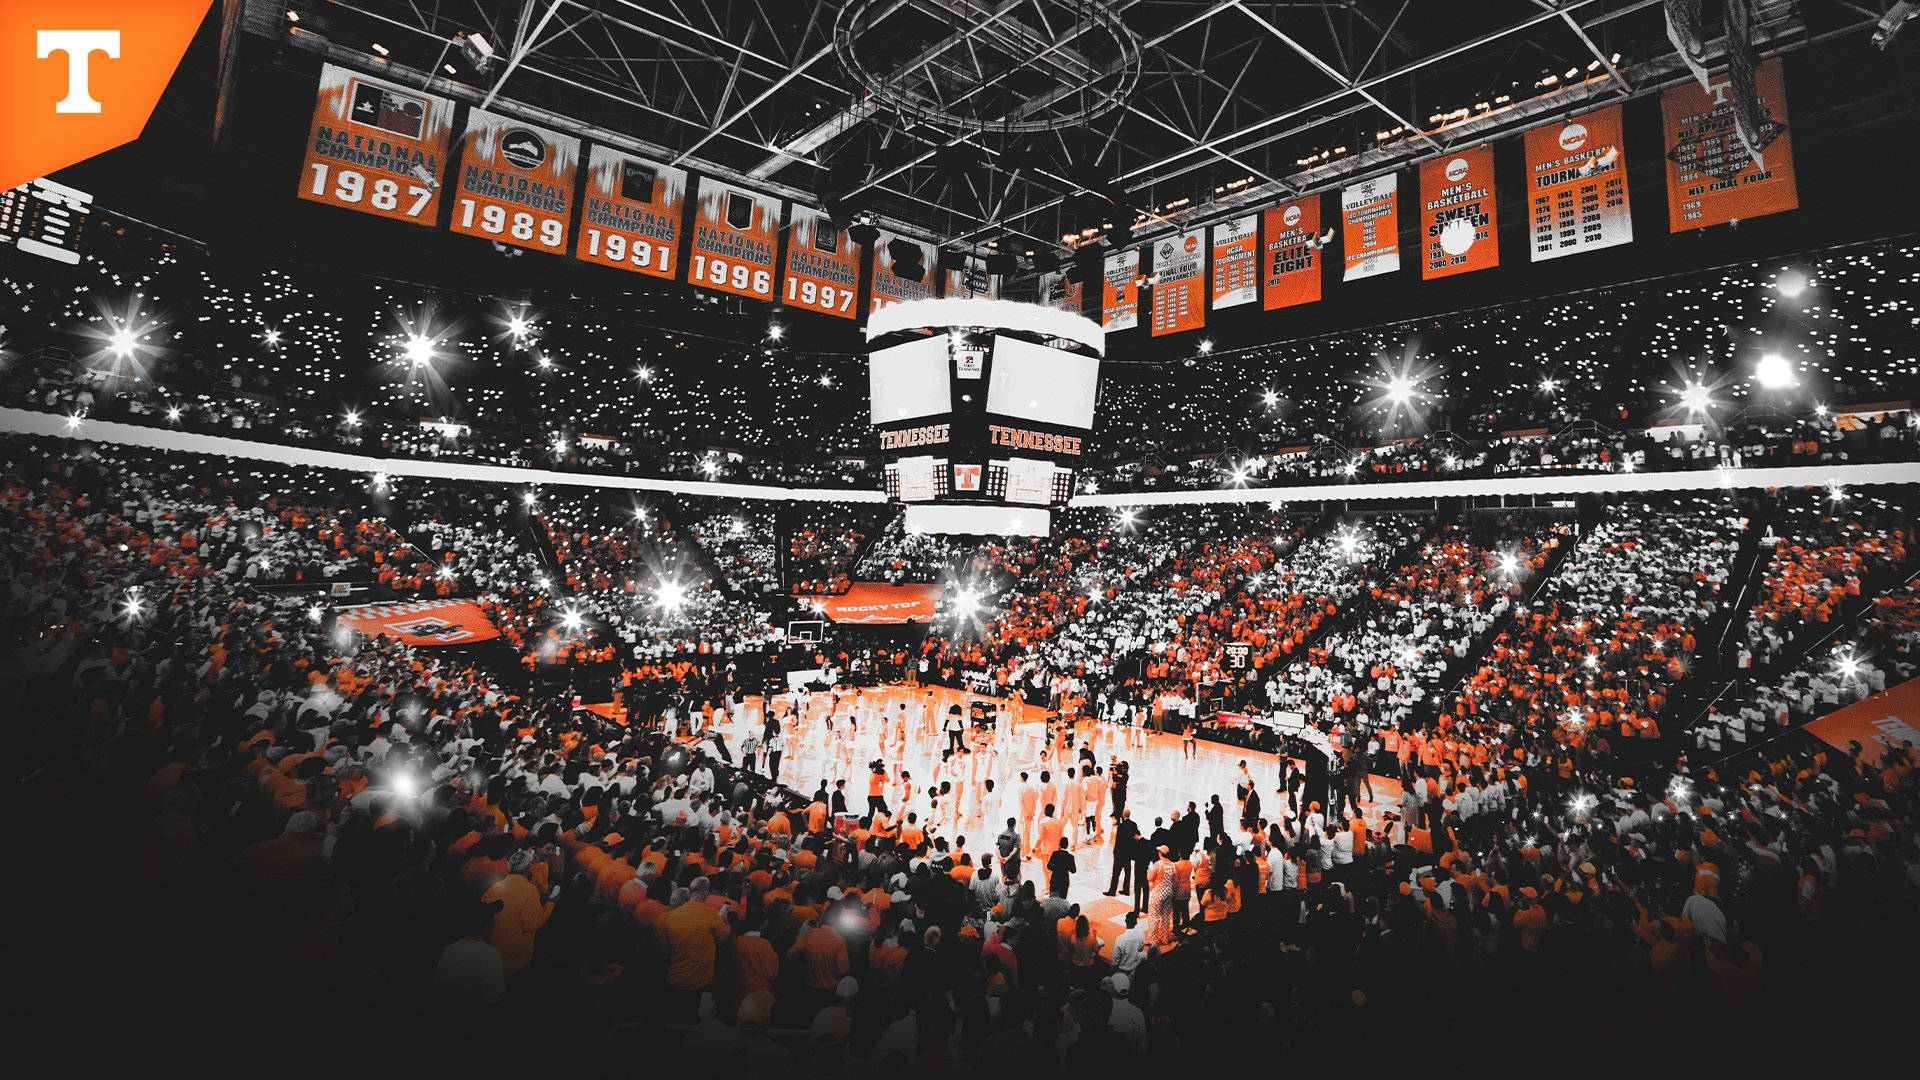 University Of Tennessee Basketball Game Wallpaper